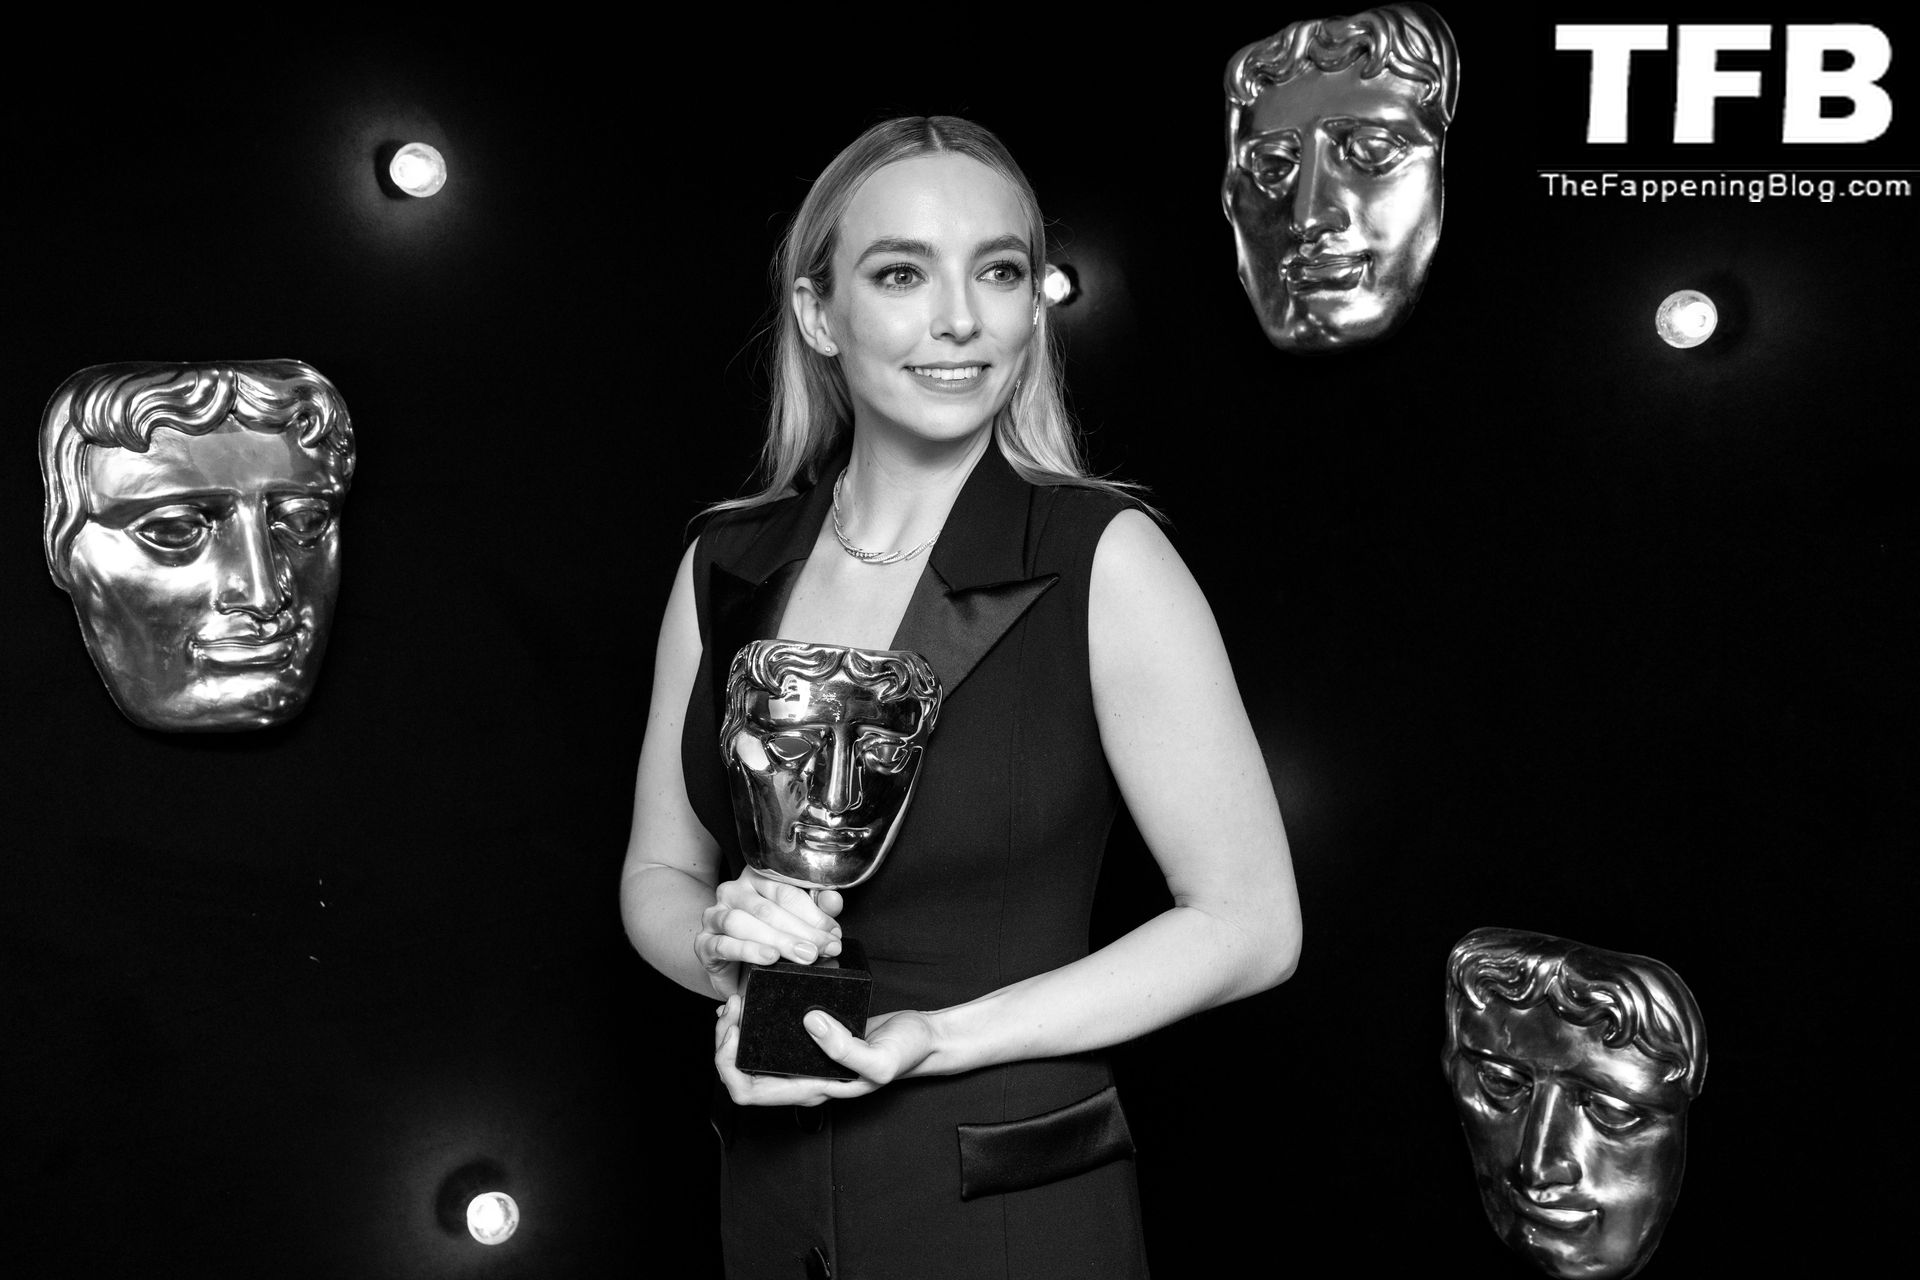 Jodie-Comer-Sexy-The-Fappening-Blog-29.jpg